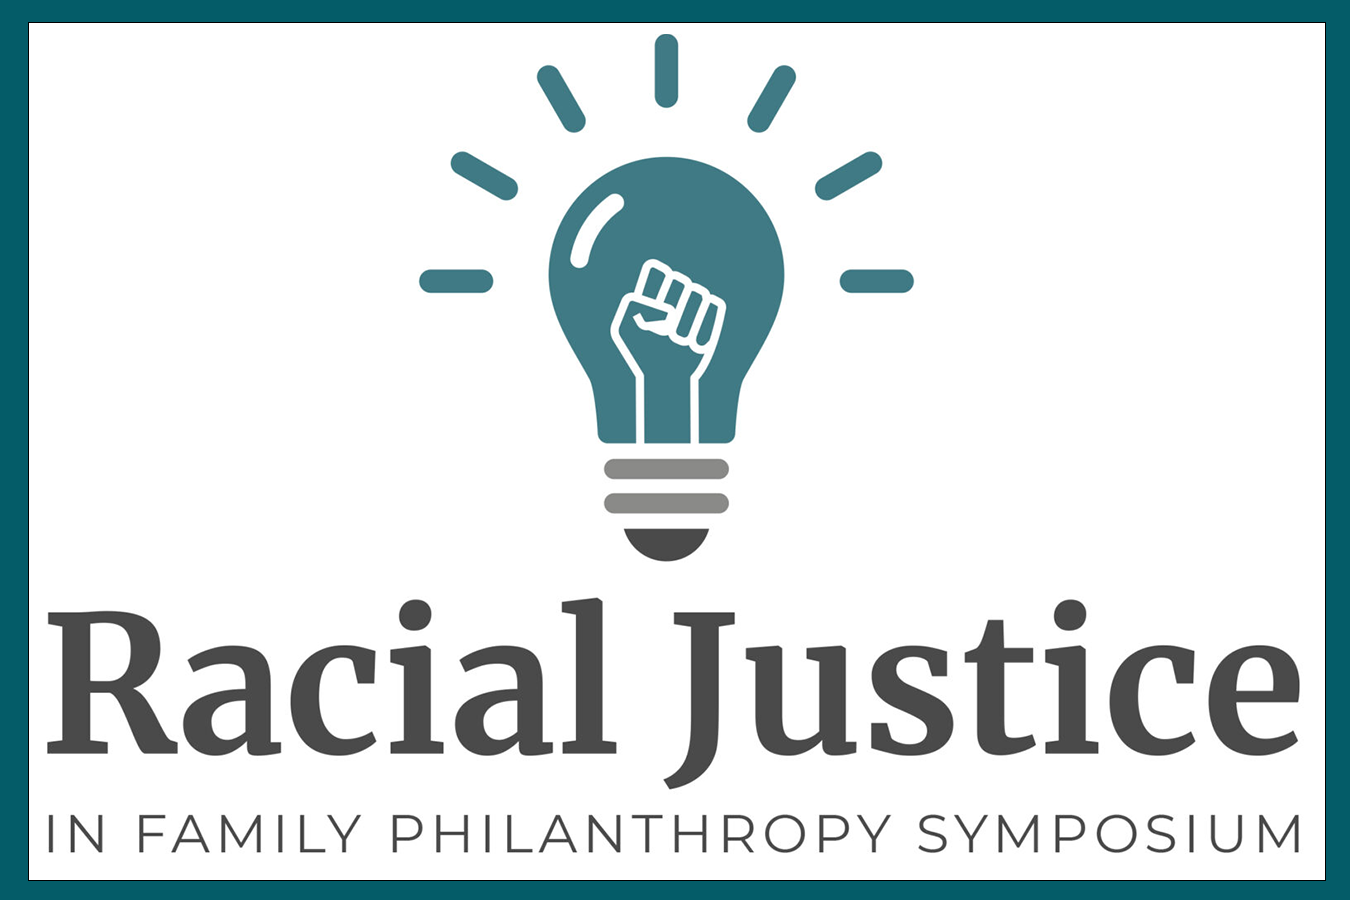 National Center for Family Philanthropy Racial Justice Symposium: event image shows an icon of a fist raised in solidarity encompassed within a lightbulb icon